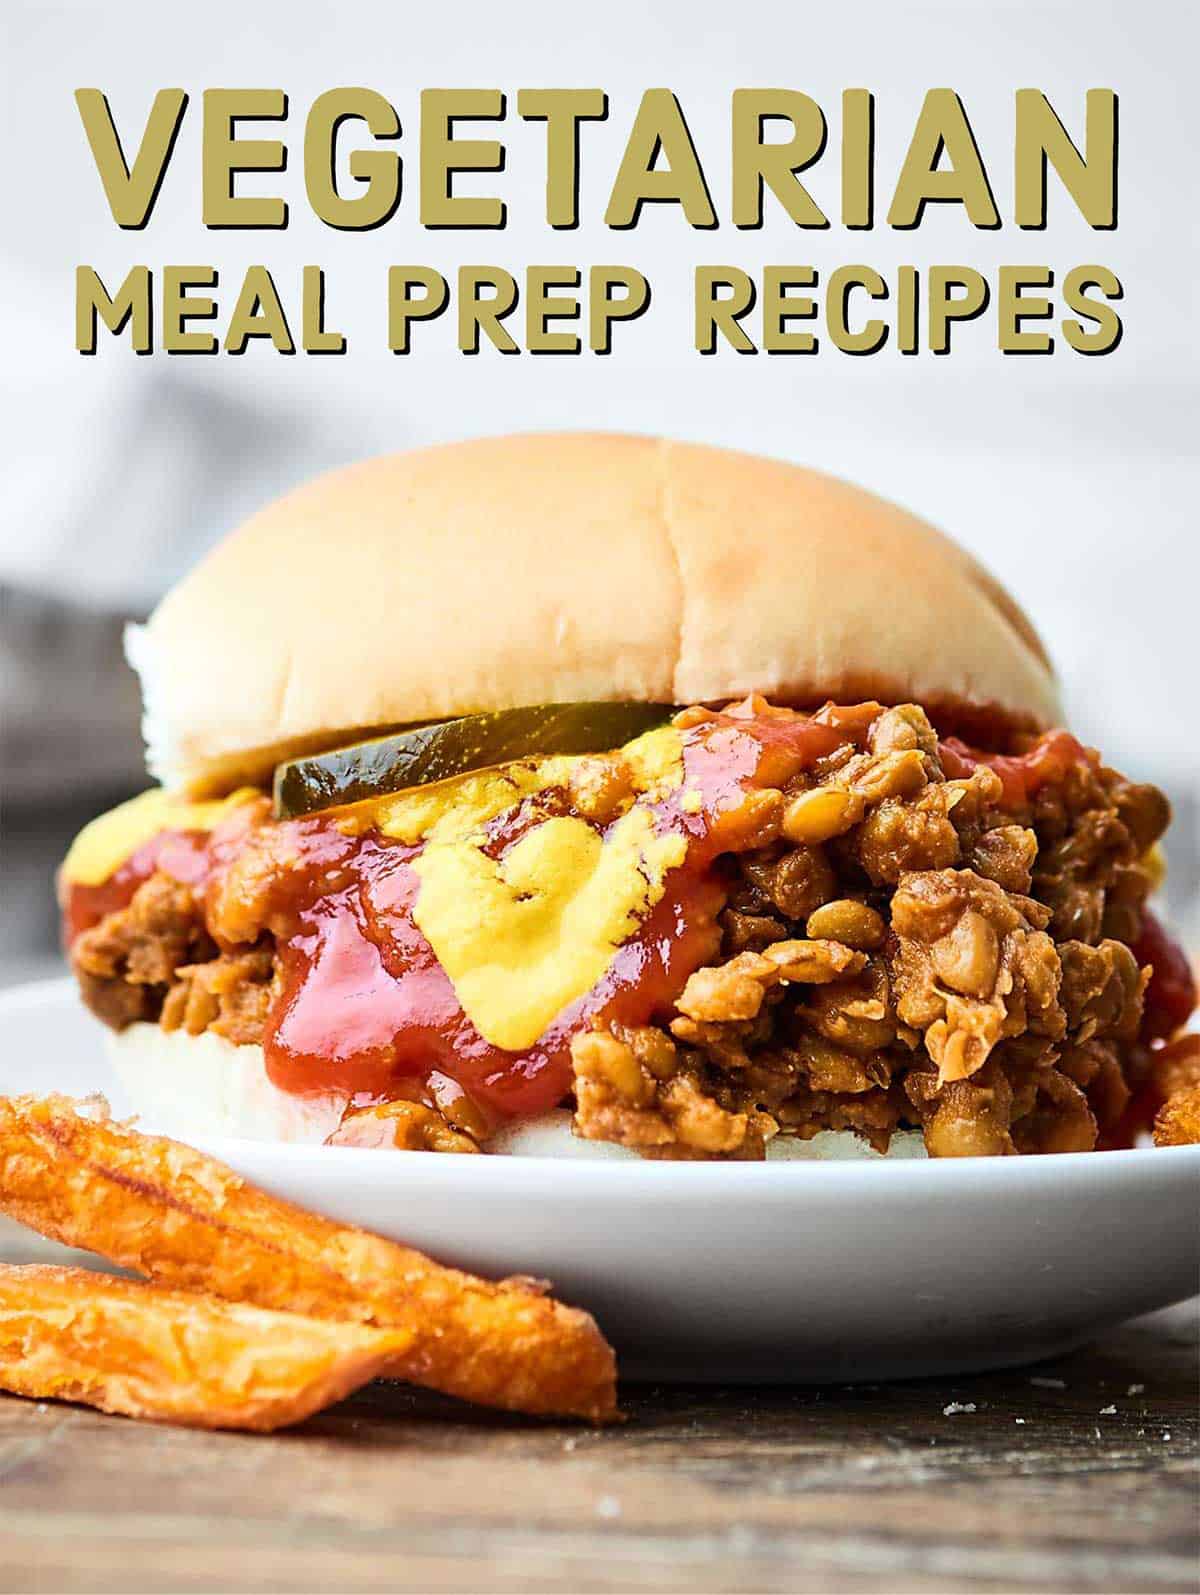 Healthy, Easy Vegetarian Meal Prep Recipes! Everything from breakfast, to lunch, snacks, dinner, and dessert! showmetheyummy.com #vegetarian #mealprep #healthy